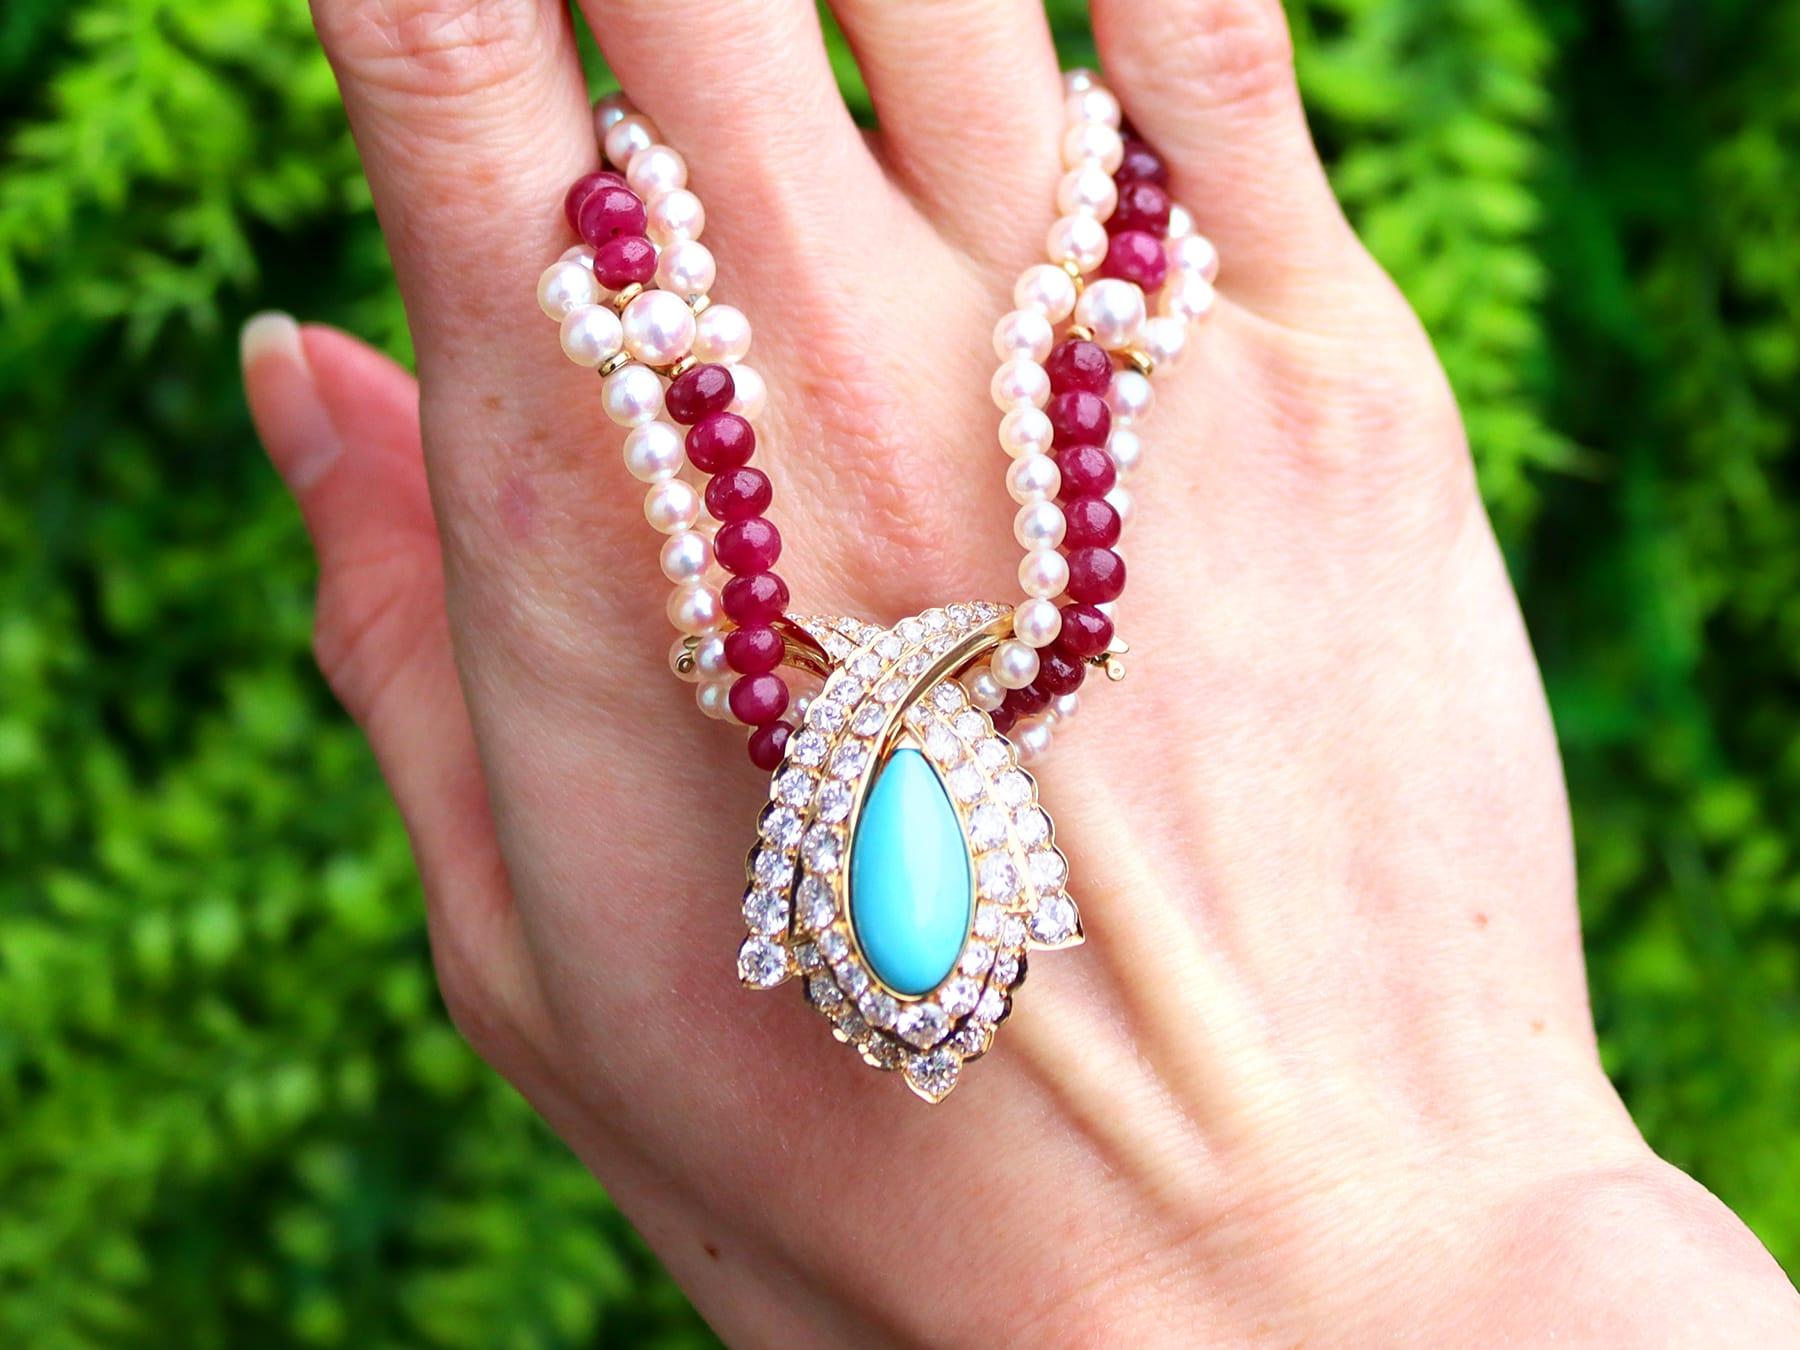 A stunning, fine and impressive vintage double strand pearl and single strand 23 carat ruby necklace with a 4.20 carat turquoise and 3.38 carat diamond, 18 karat yellow gold clasp; part of our diverse jewellery and estate jewelry collections

This